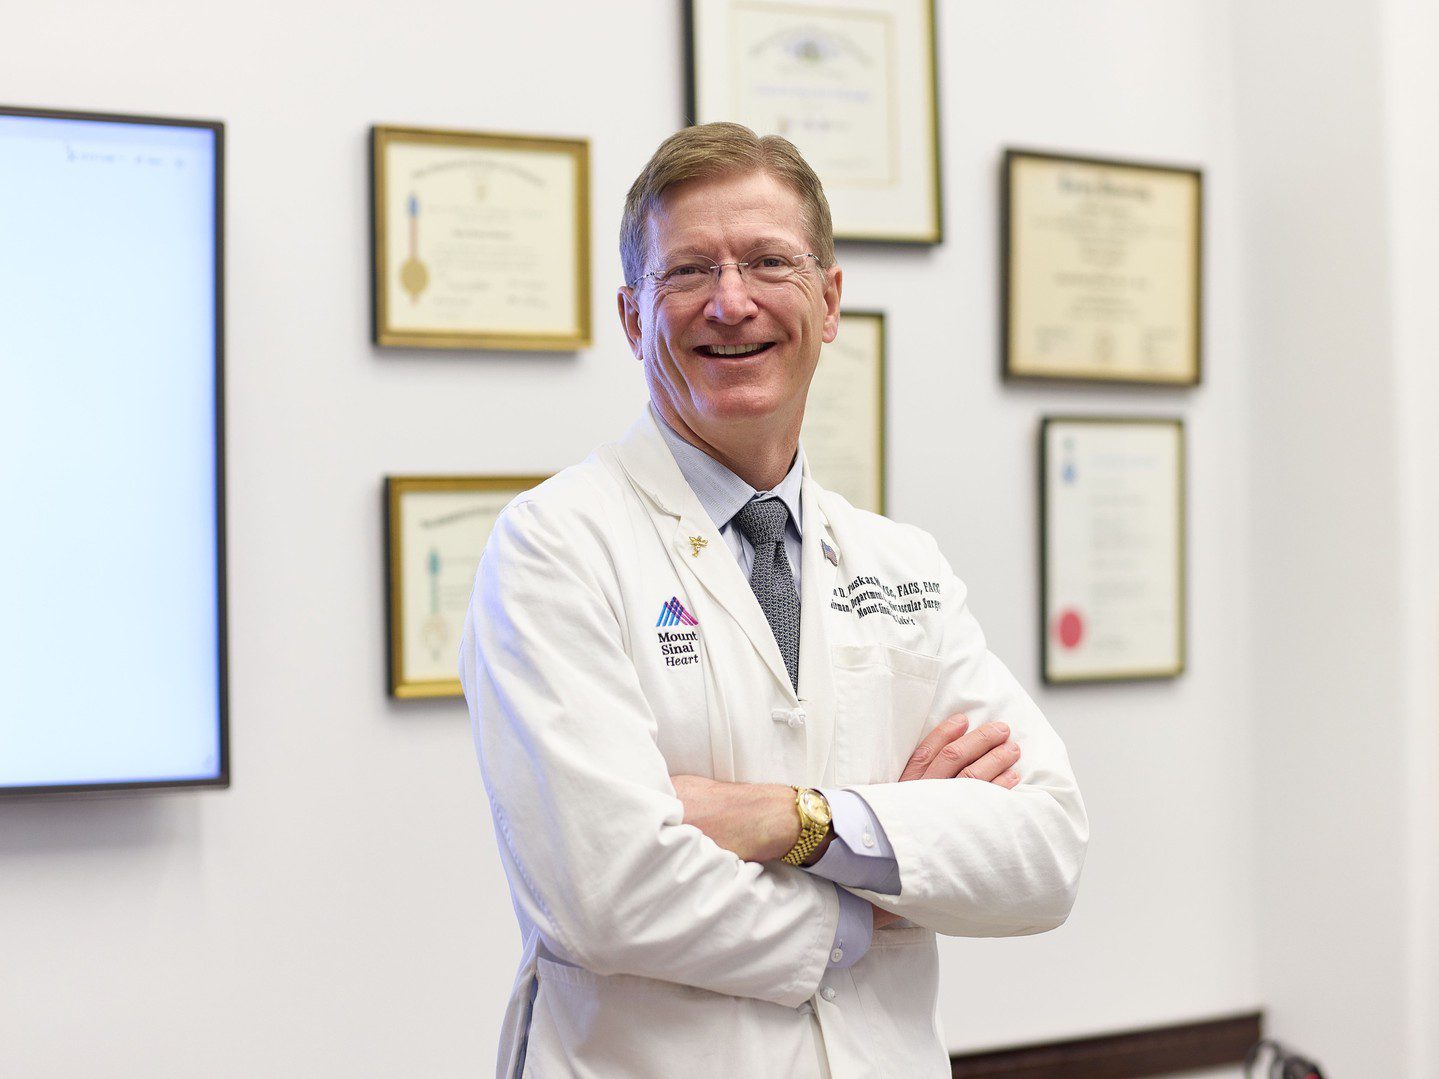 Dr. John puskas is an expert in all aspects of adult cardiac surgery and has a s...